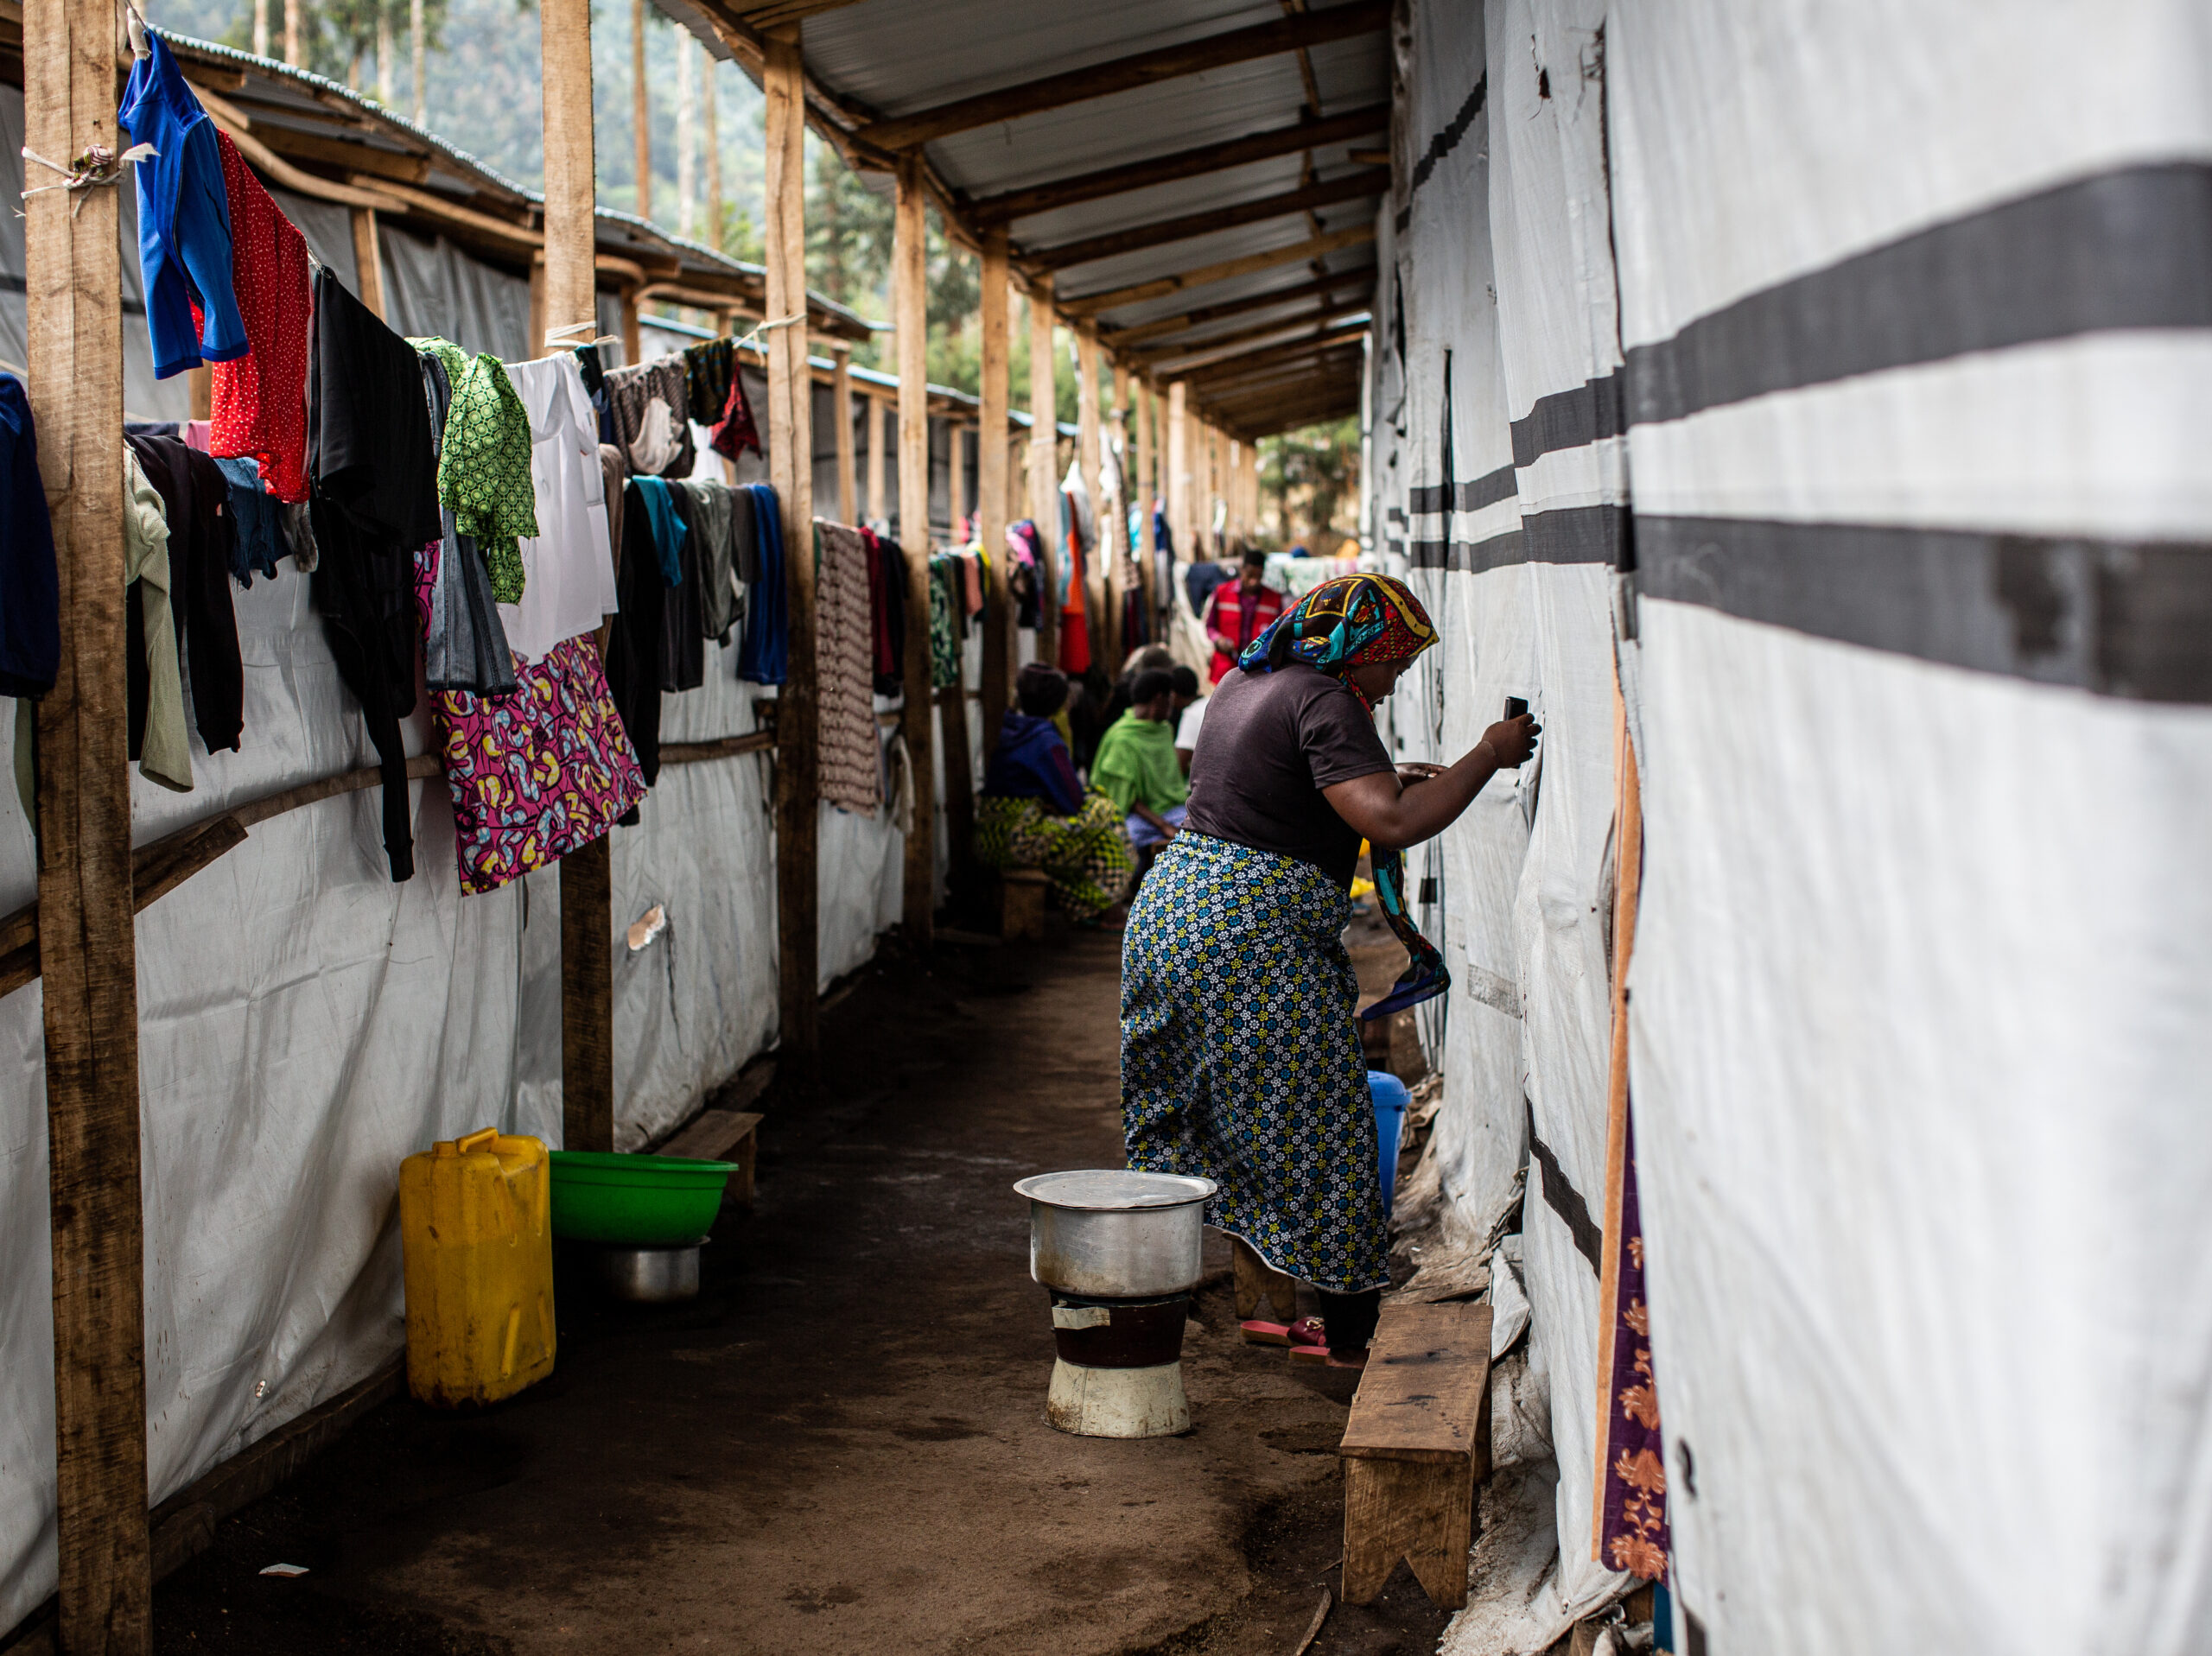 The Nkamira Transit Center in western Rwanda is home to more than 6,000 refugees who fled violence in the eastern Democratic Republic of Congo.